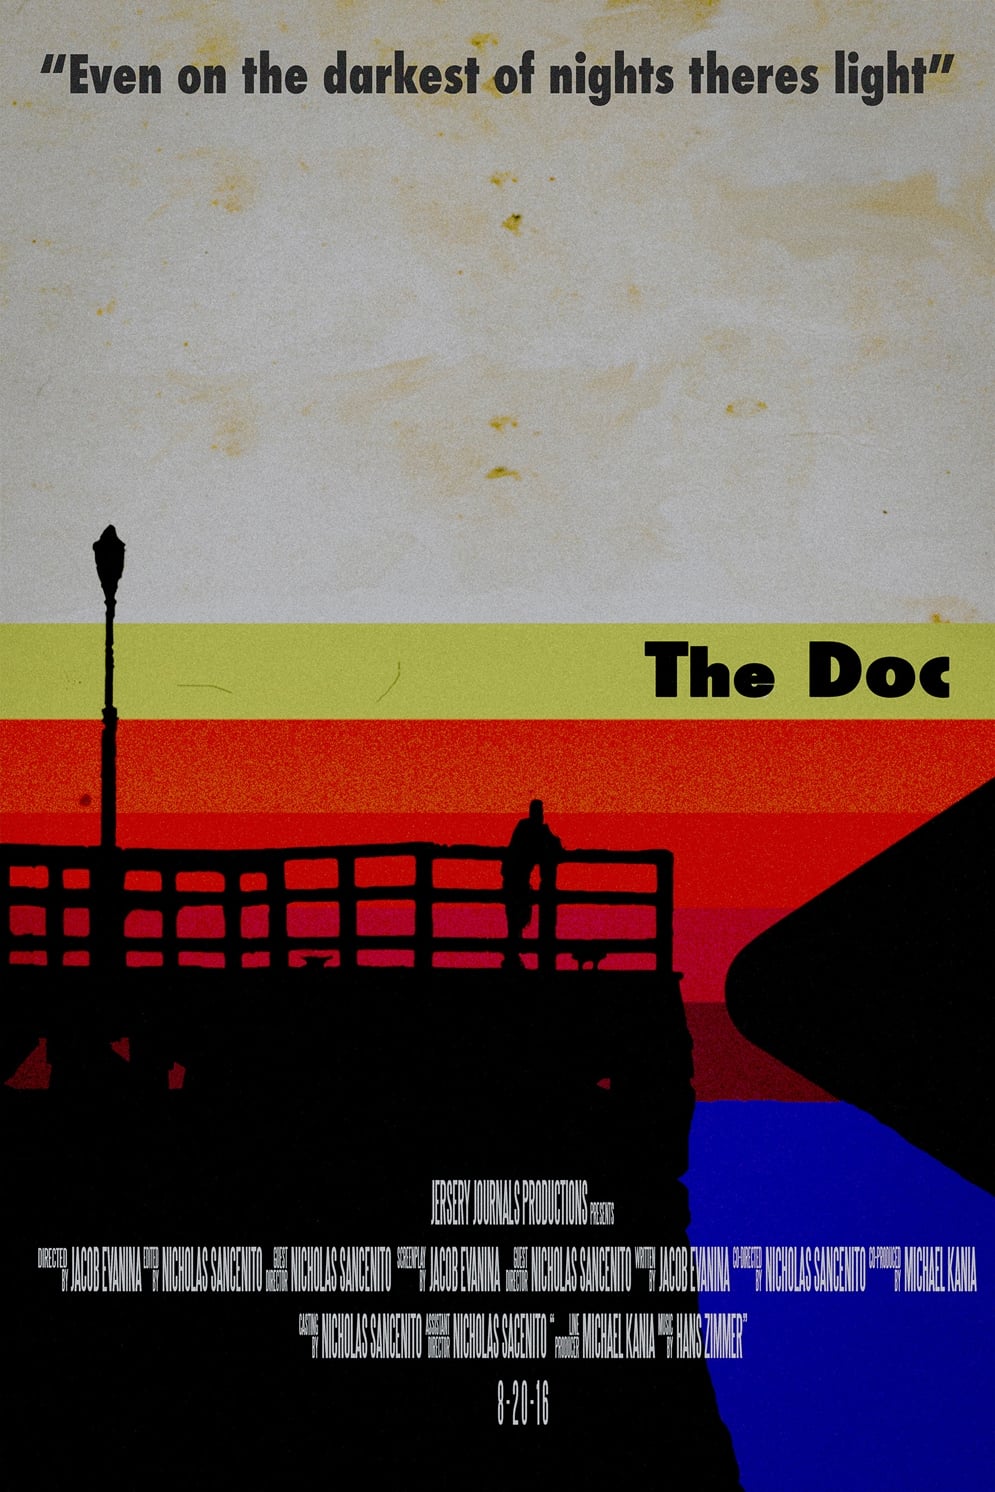 The Doc